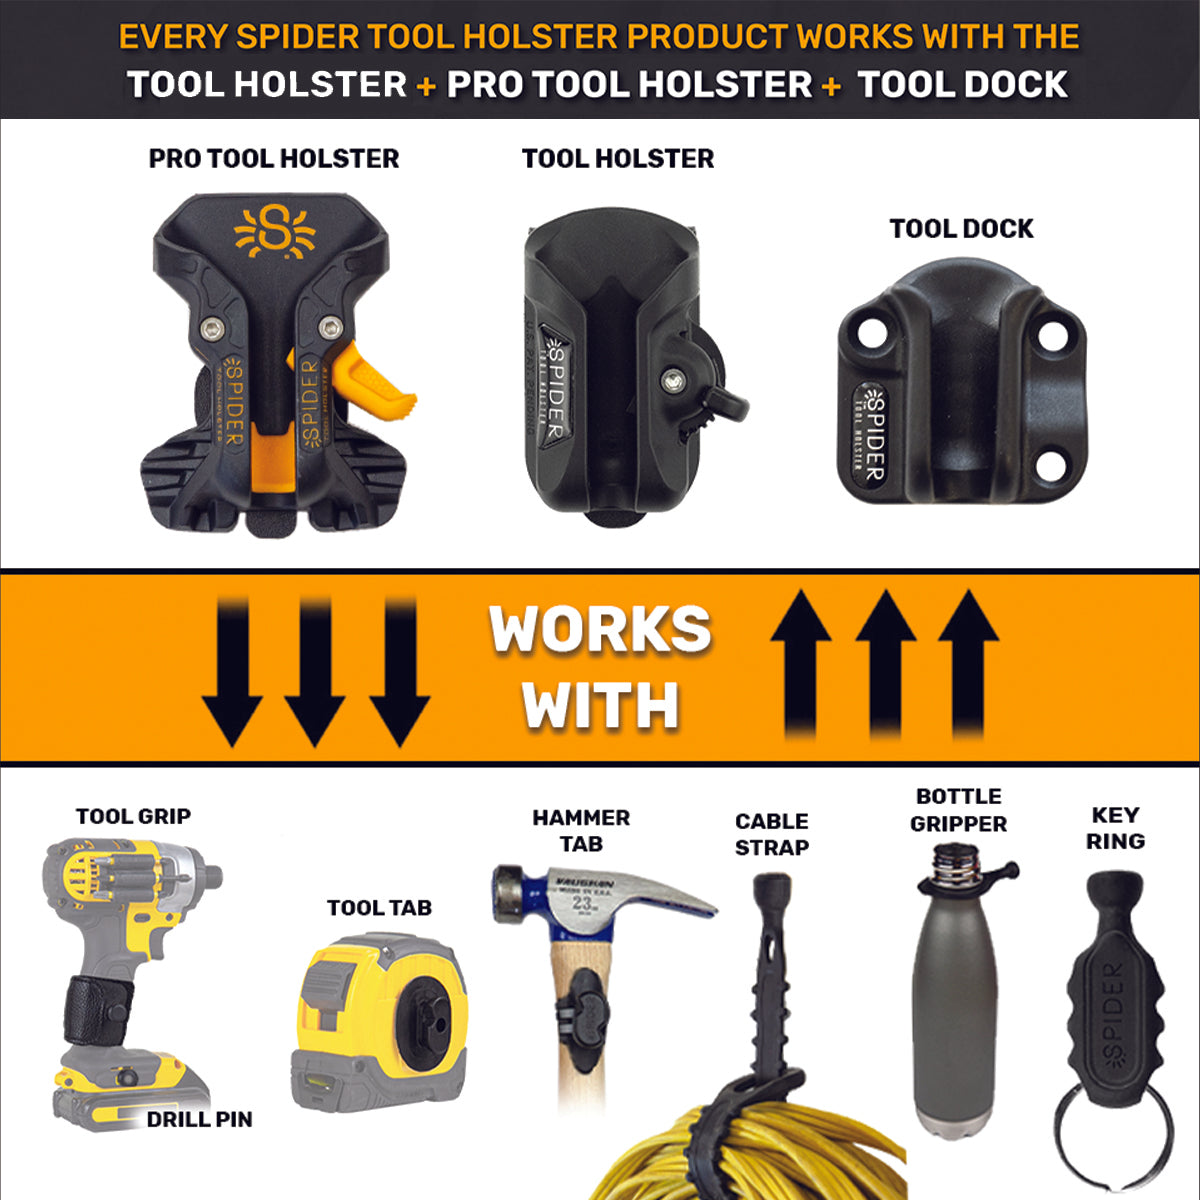 5150TH: Pro Tool Tether